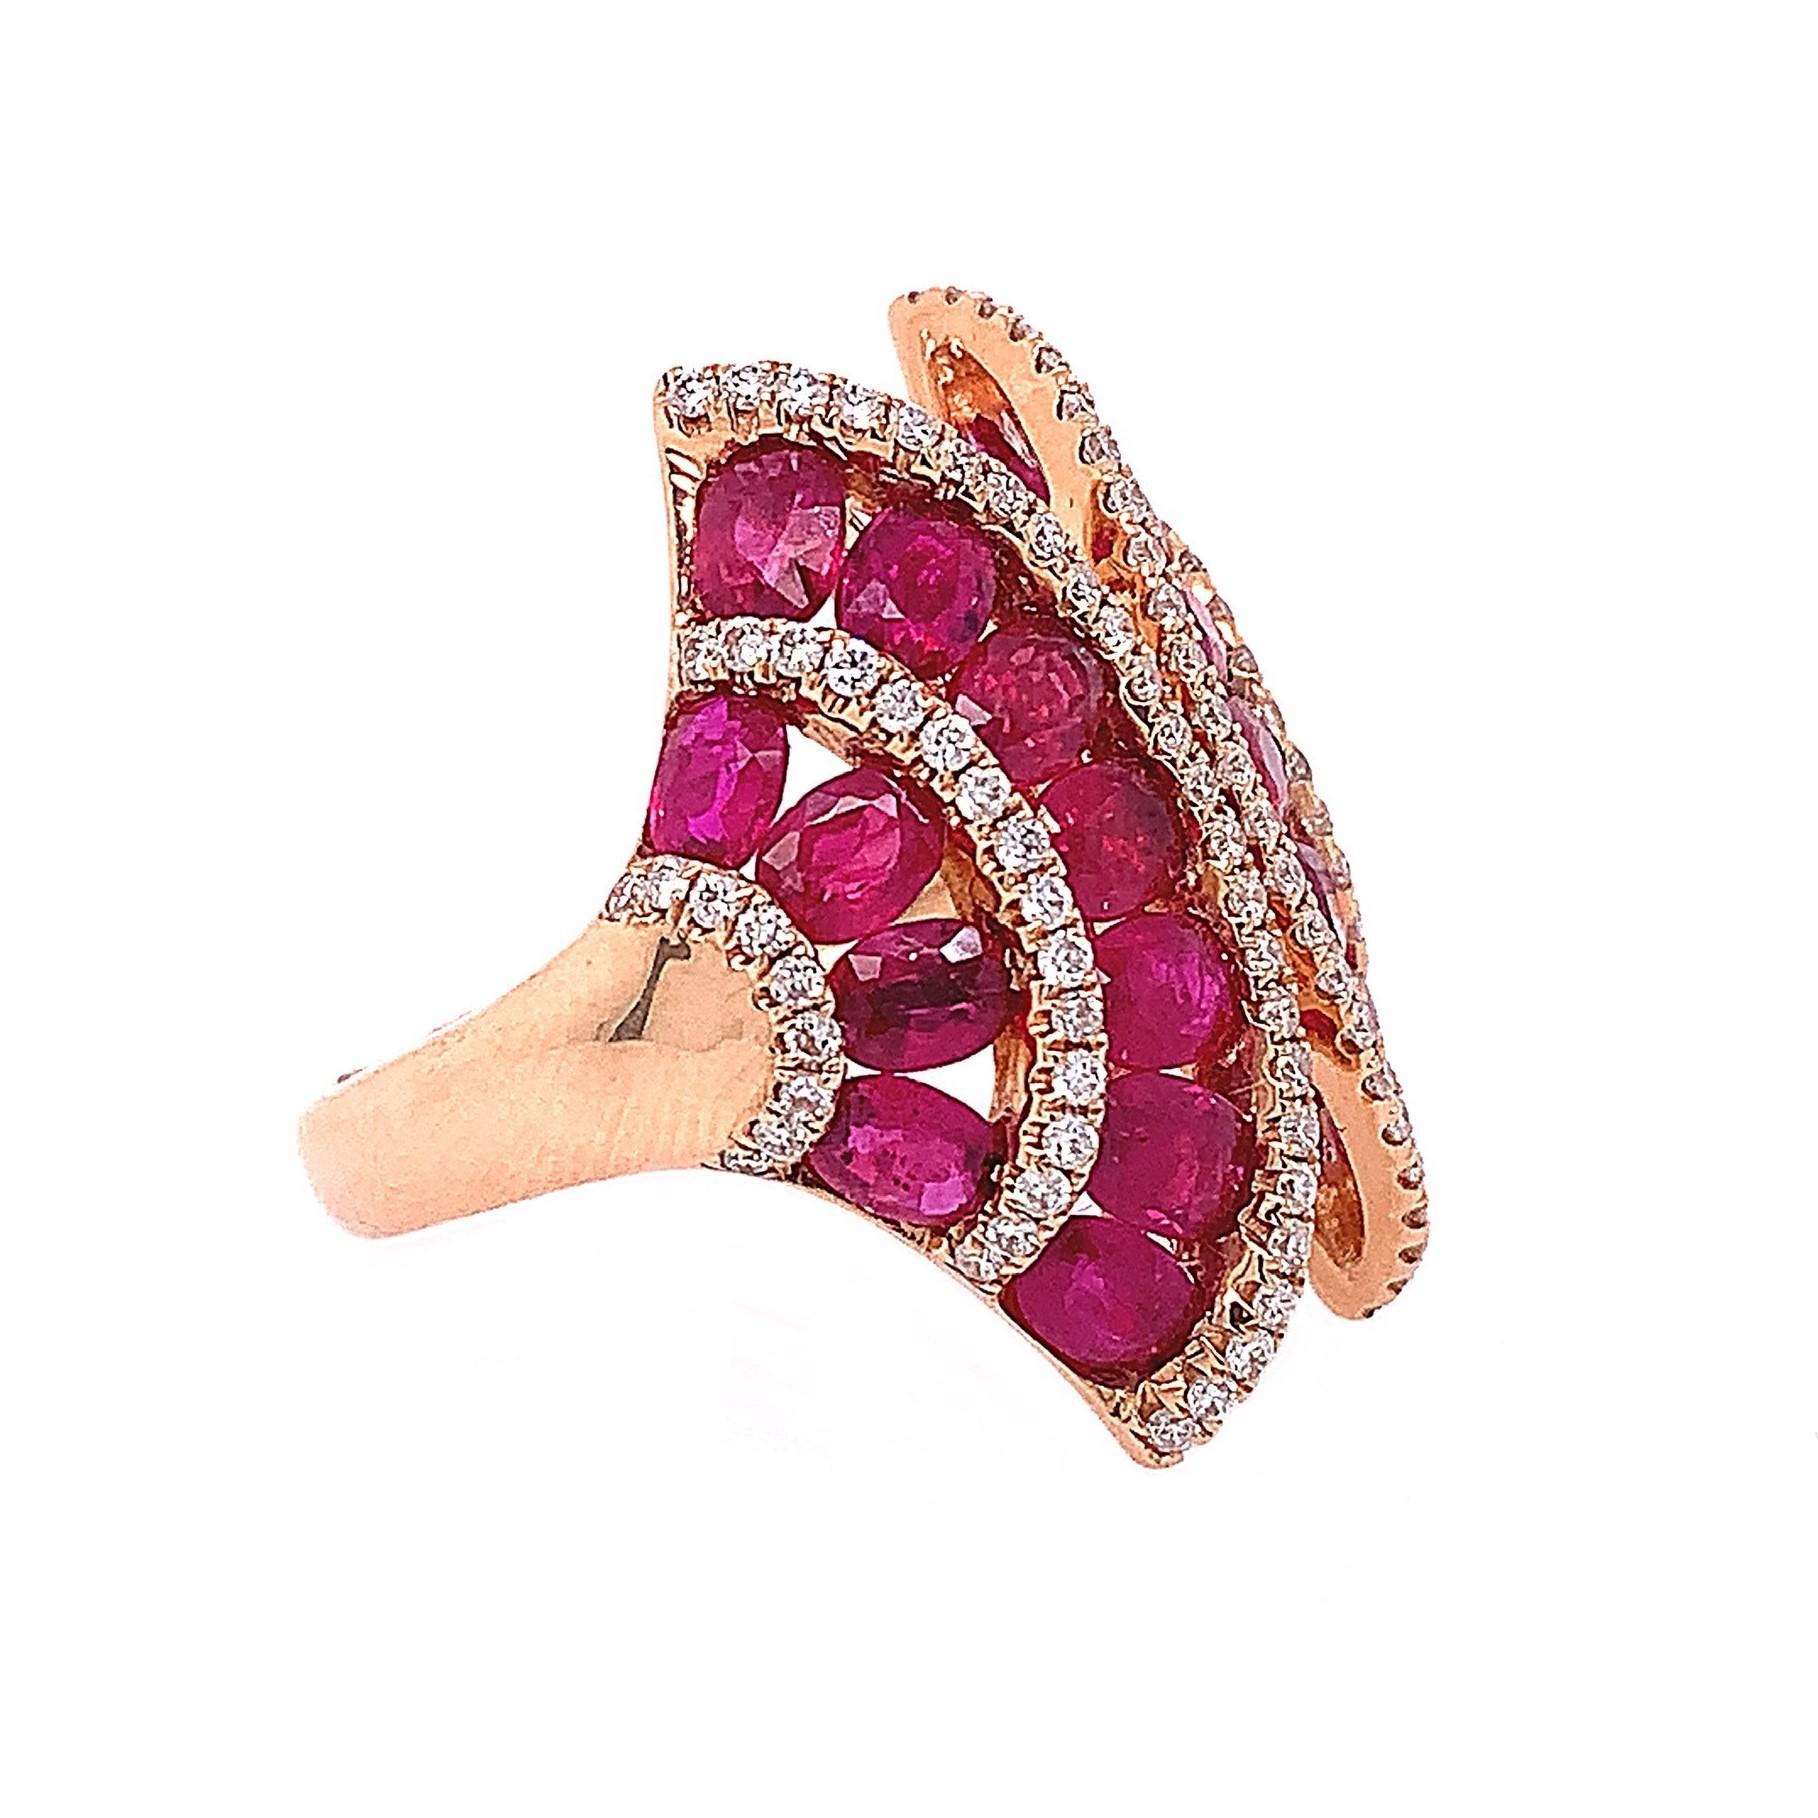 Oval shape rubies with diamonds in a fan shaped ring set in 18K Rose Gold.

Ruby: 4.53ct total weight
Diamond: 0.49ct total weight.
All diamonds are G-H/SI stones.